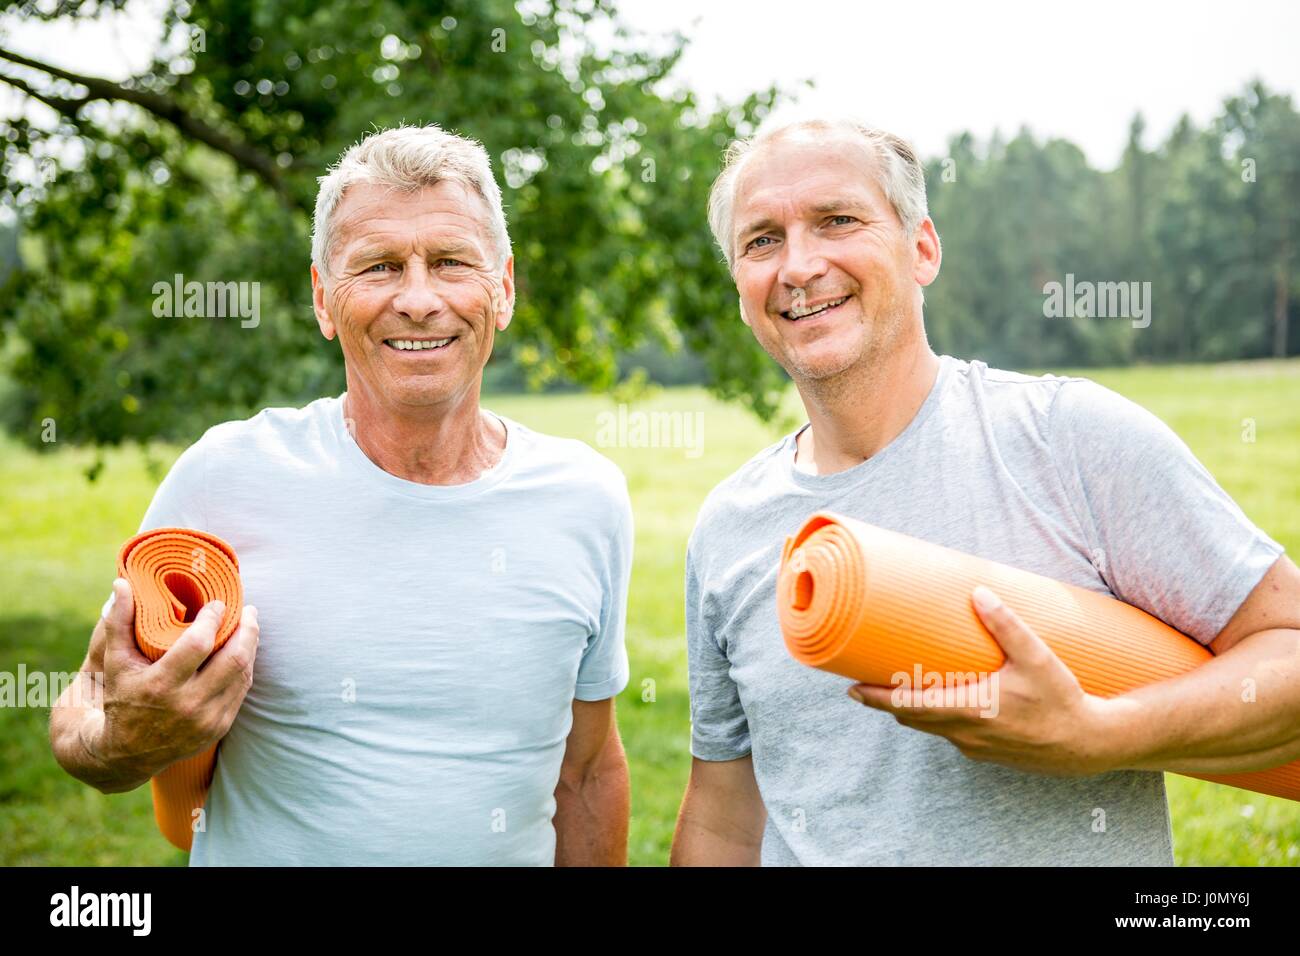 Two men with yoga mats, smiling. Stock Photo